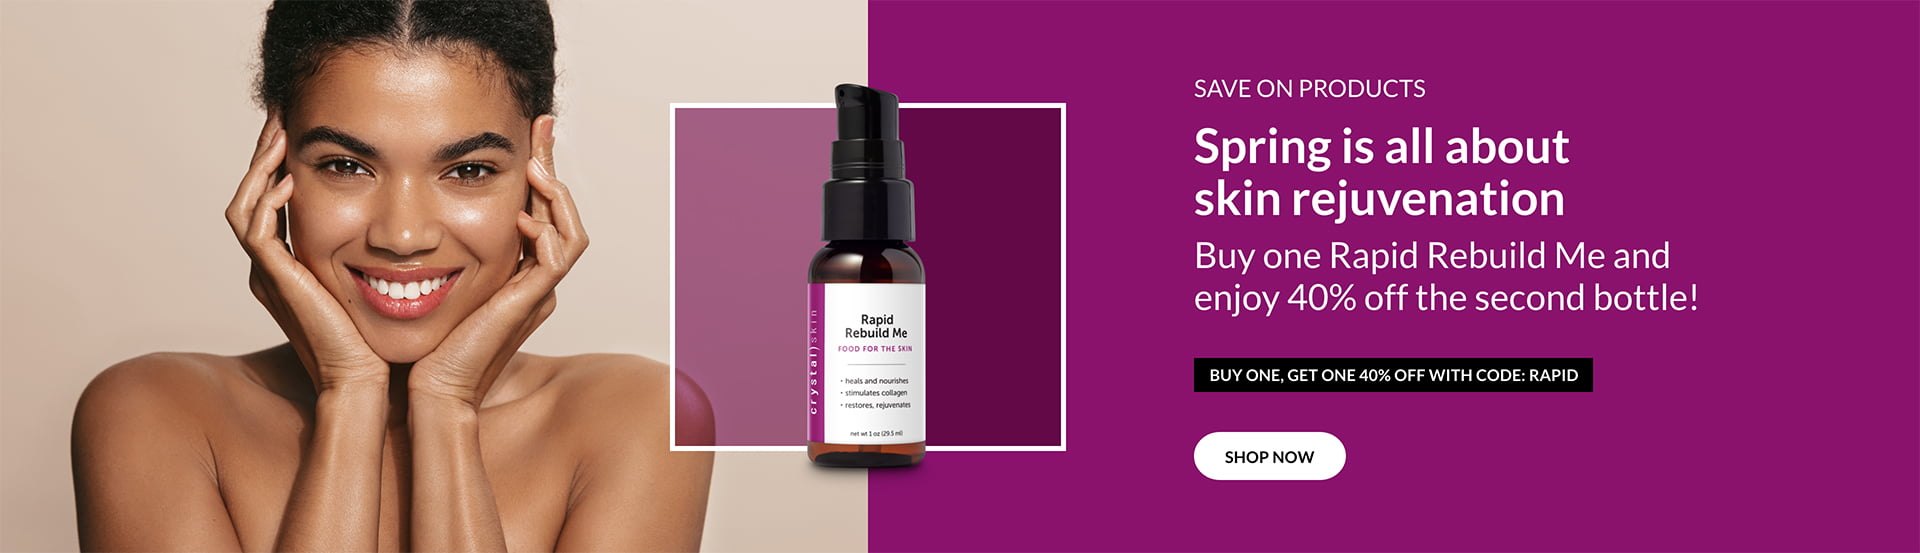 Crystal Skin Products | Buy One Rapid Rebuild Me, get second at 40% Off.